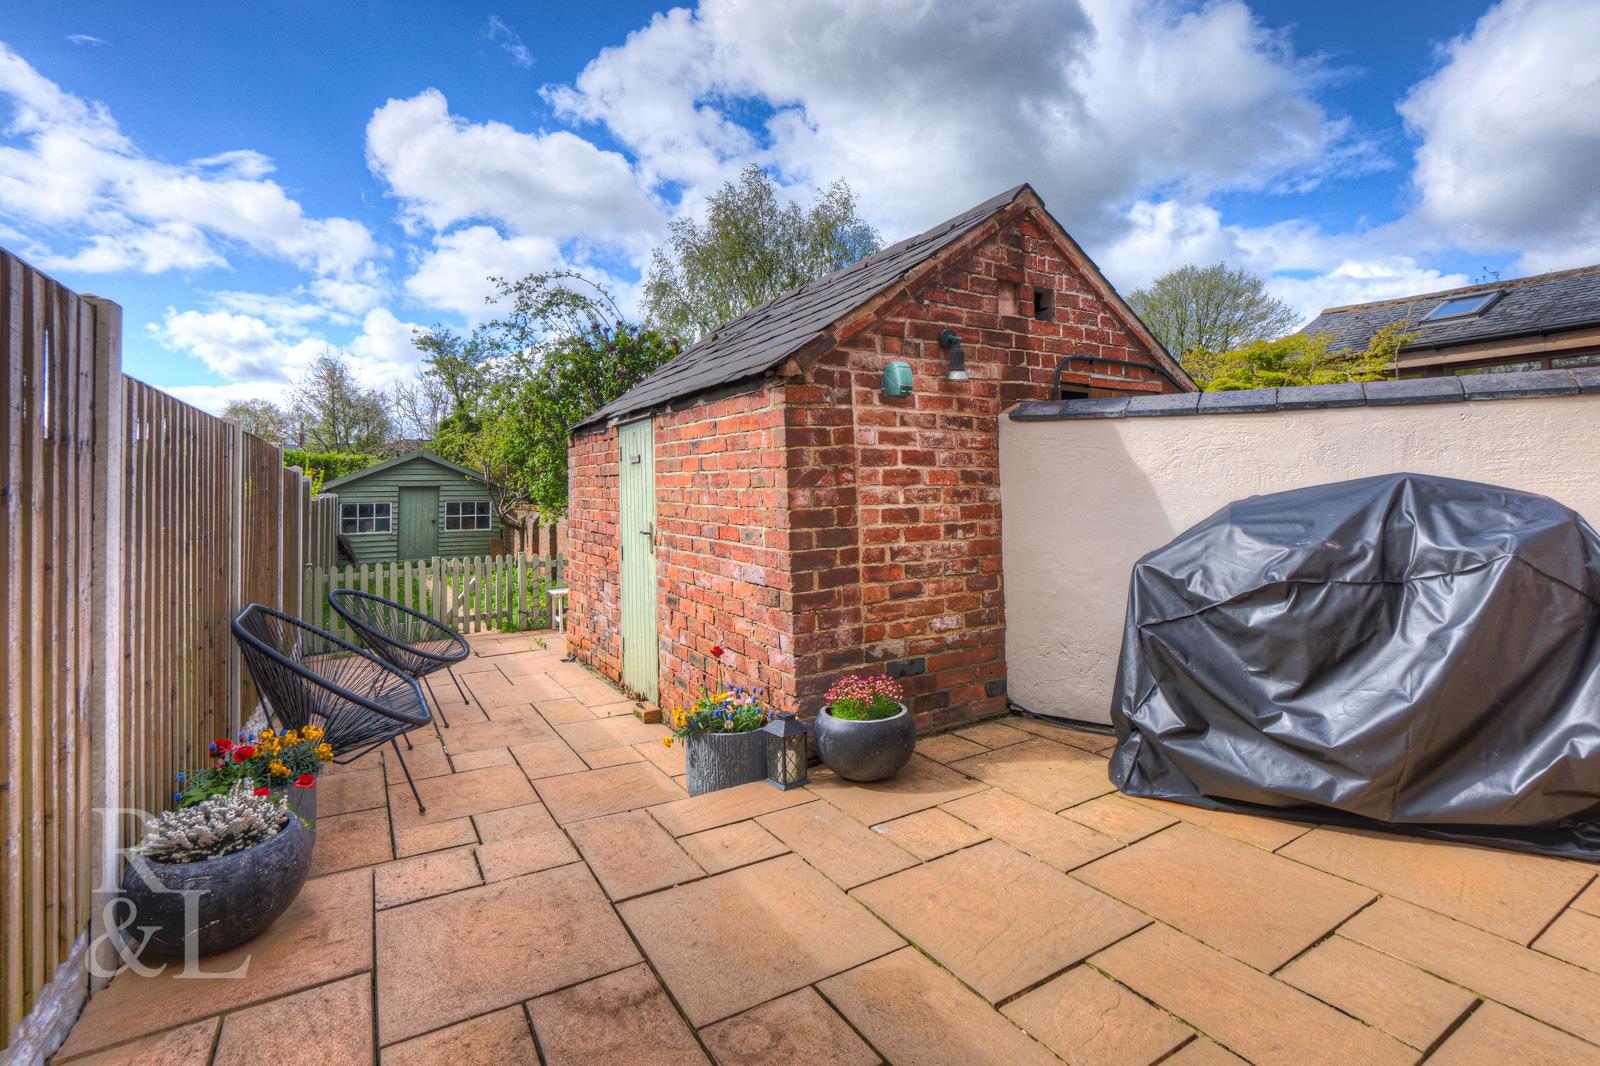 Property image for Tamworth Road, Ashby-De-La-Zouch